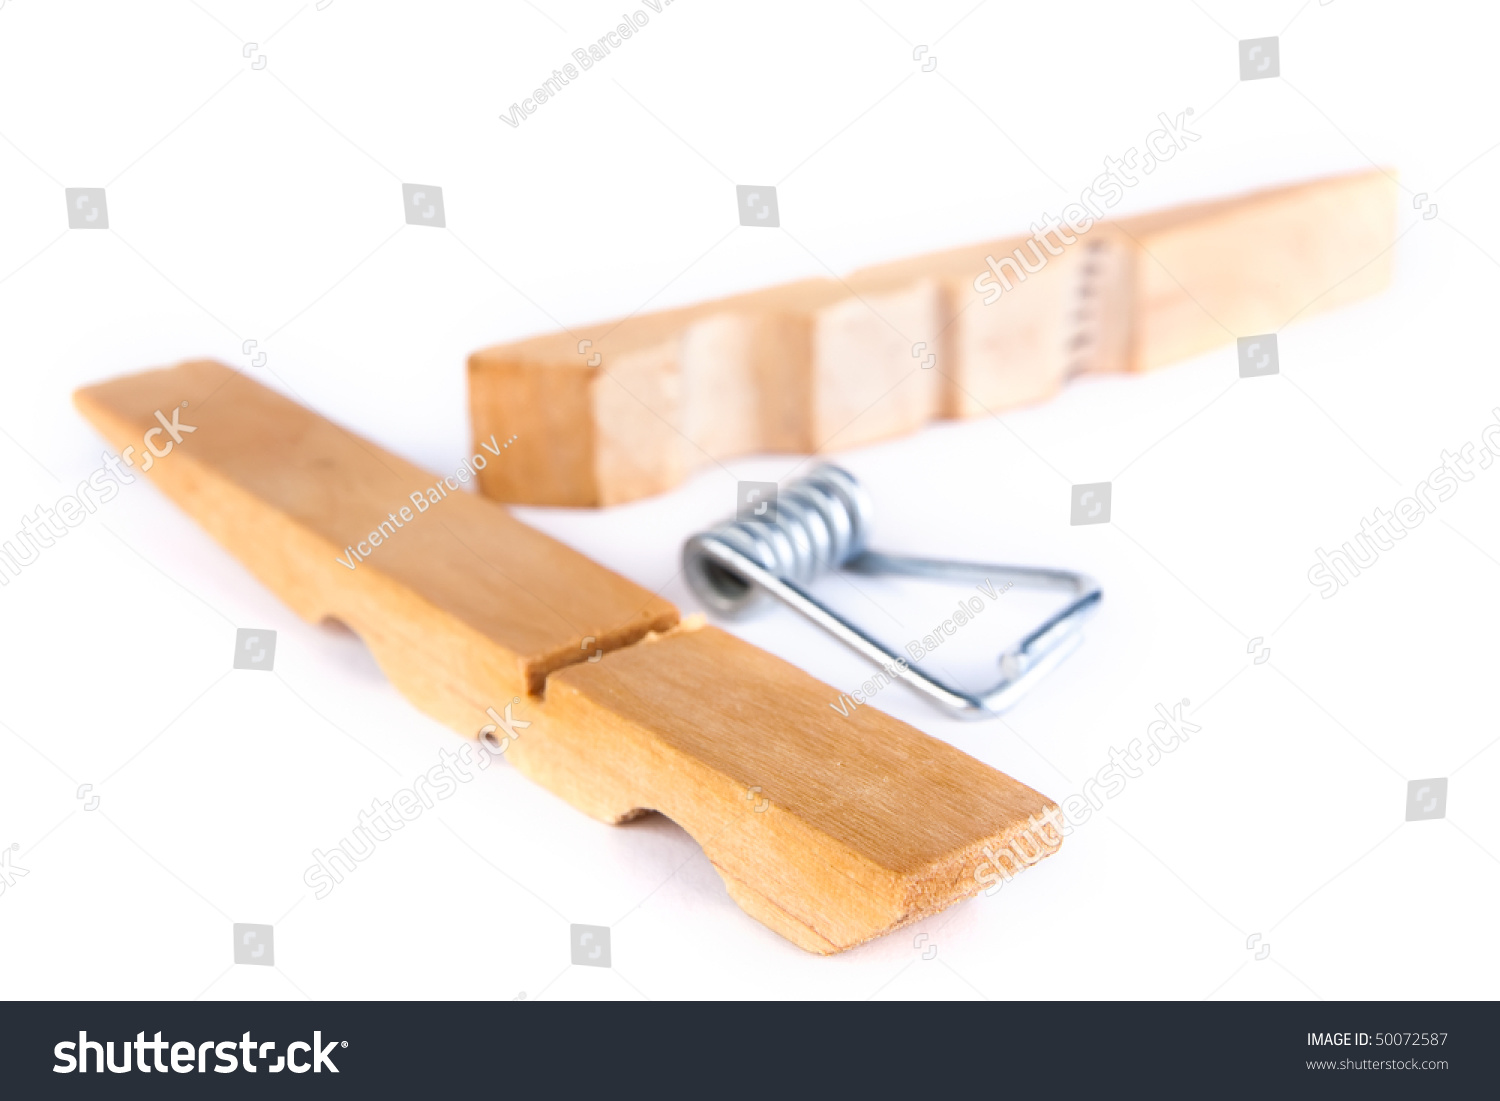 Wooden Clothespin Break Into Pieces Against Stock Photo Edit Now